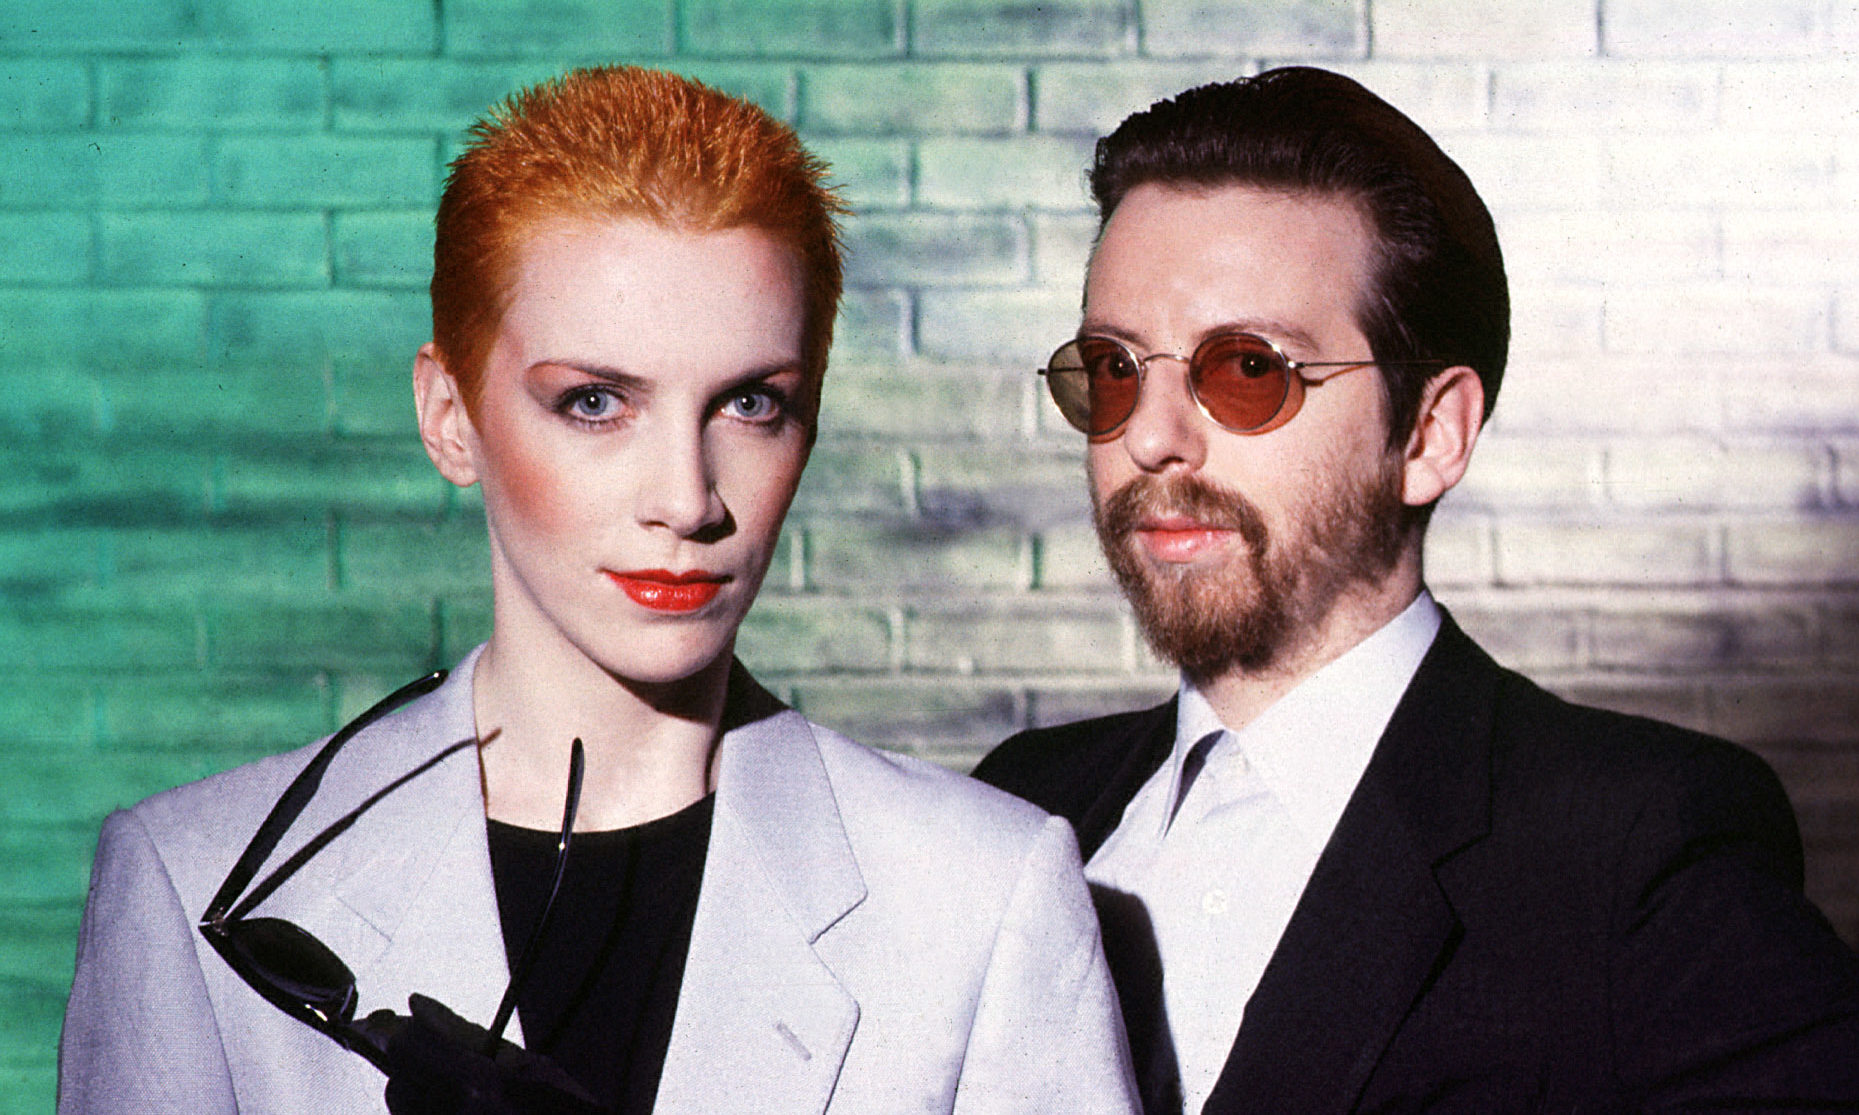 Eurythmics star Dave Stewart tells us 'it's great to be home' as